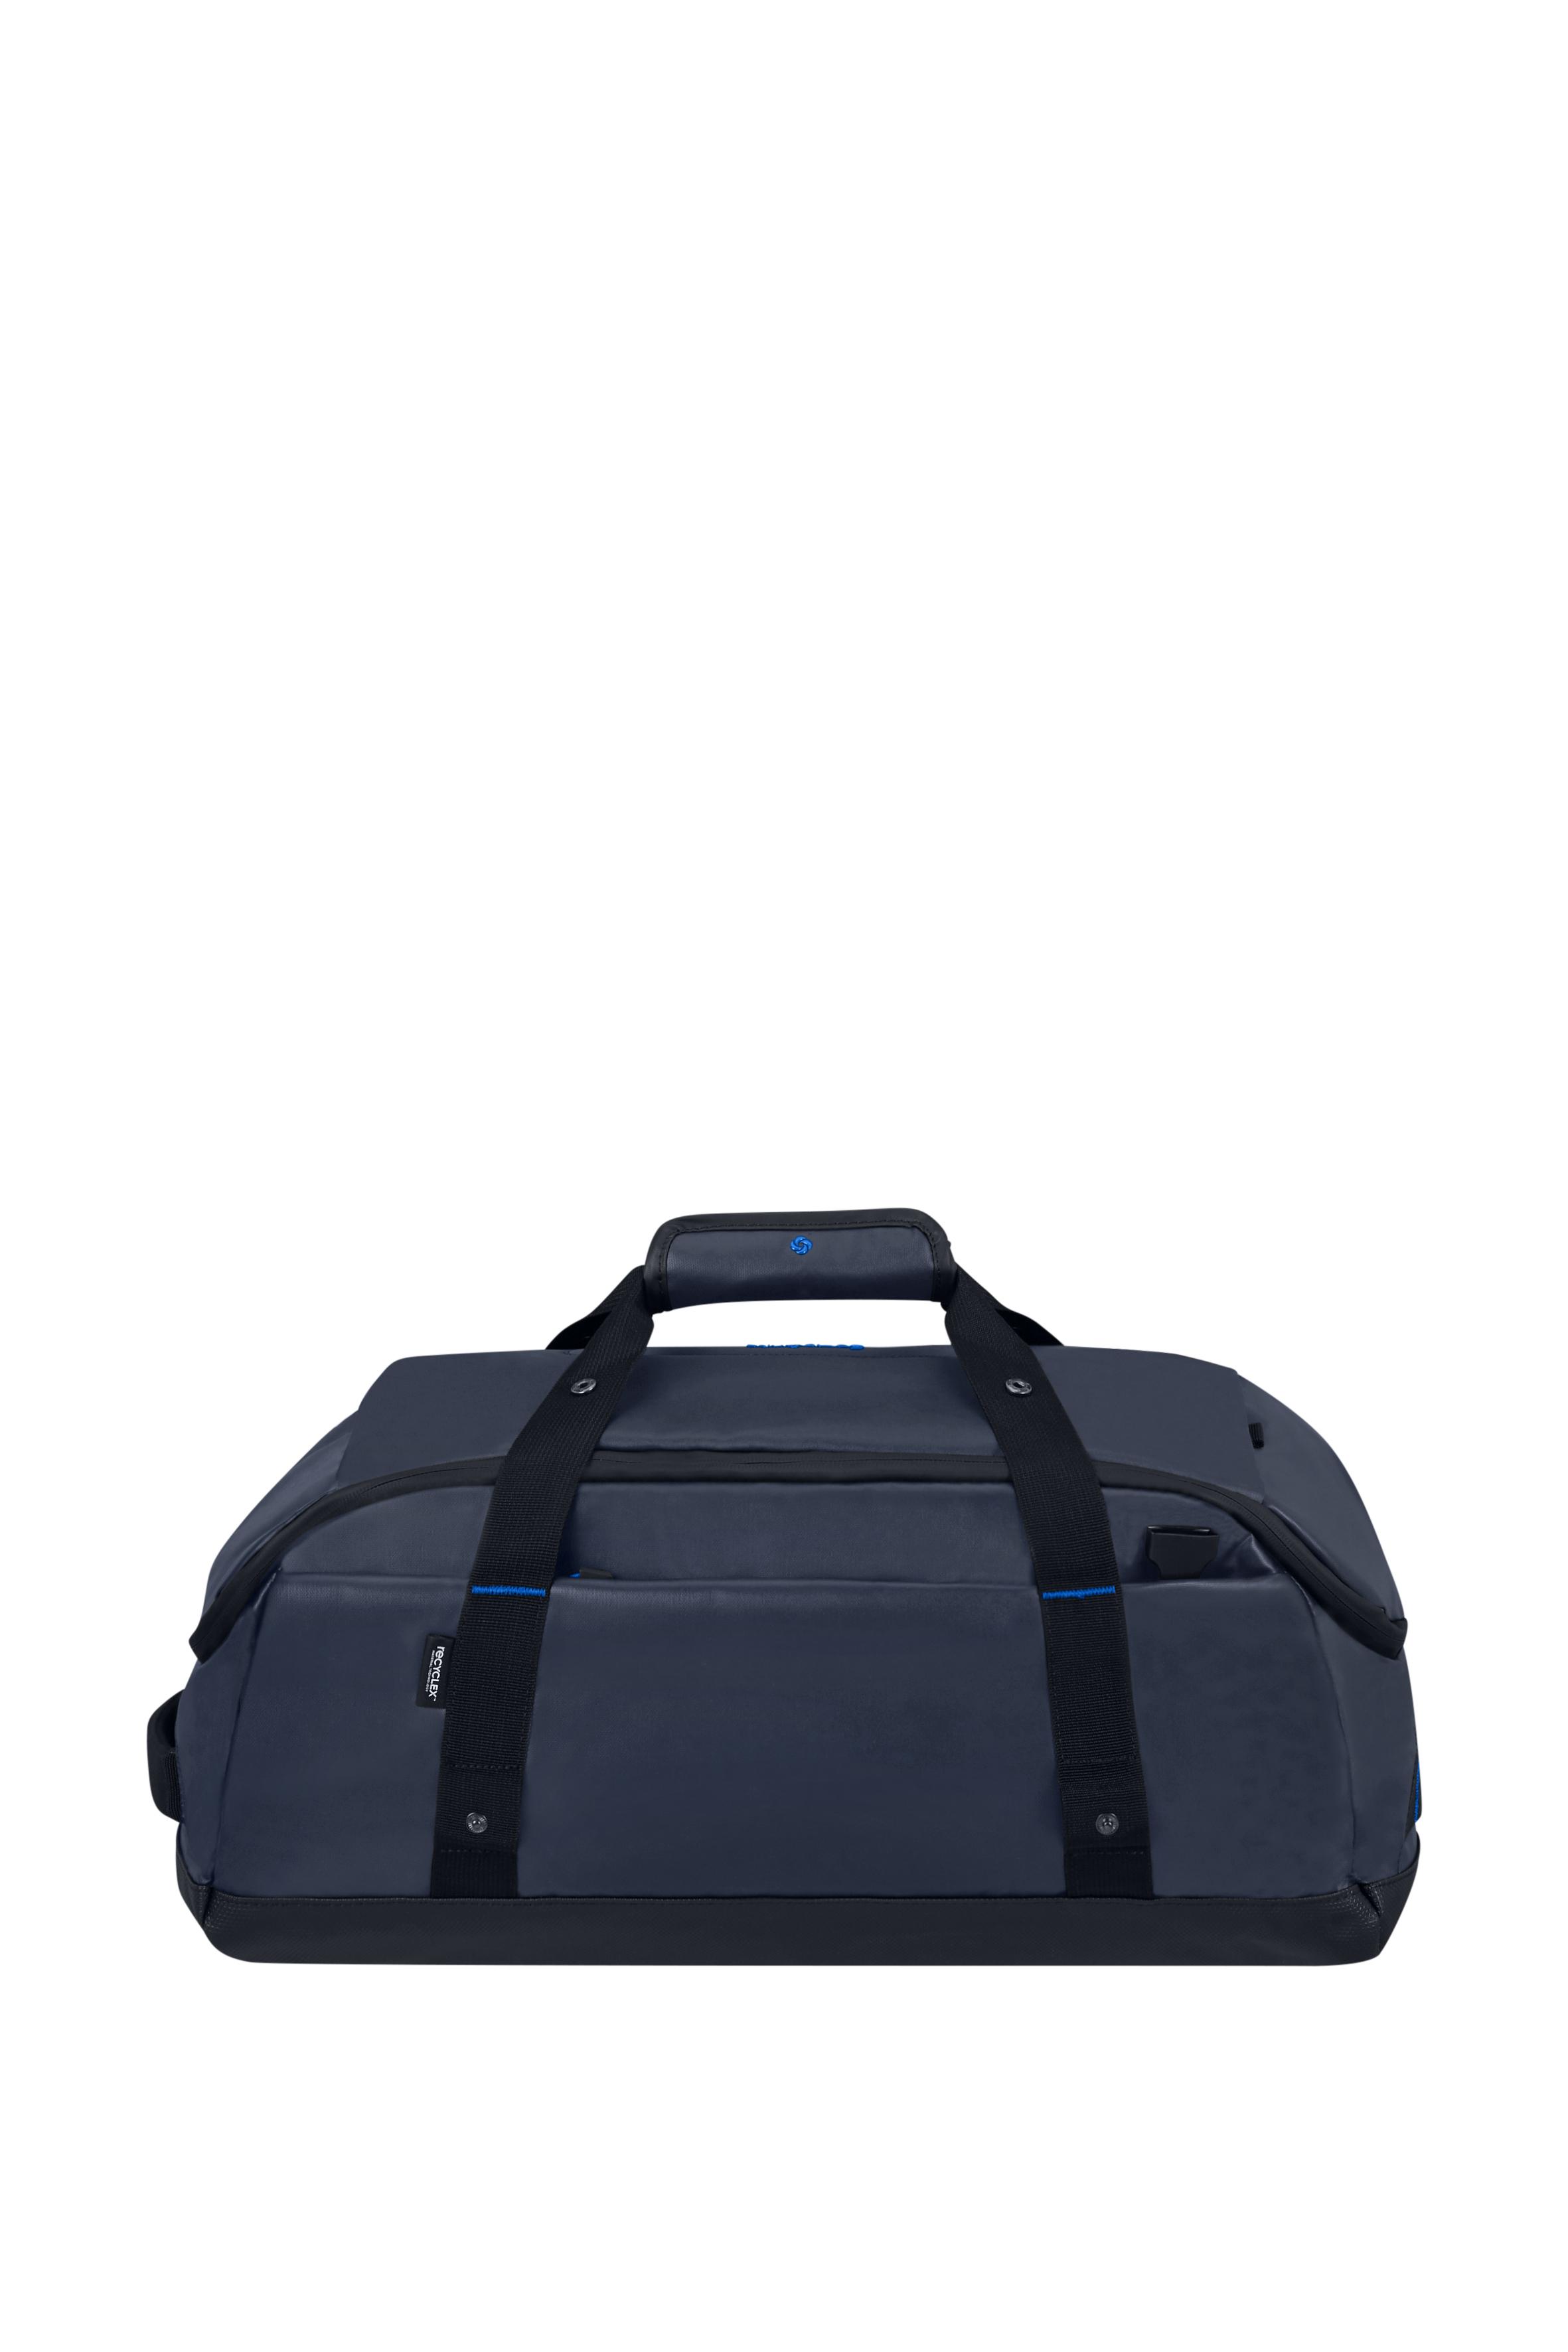 ECODIVER DUFFLE S BLUE NIGHTS